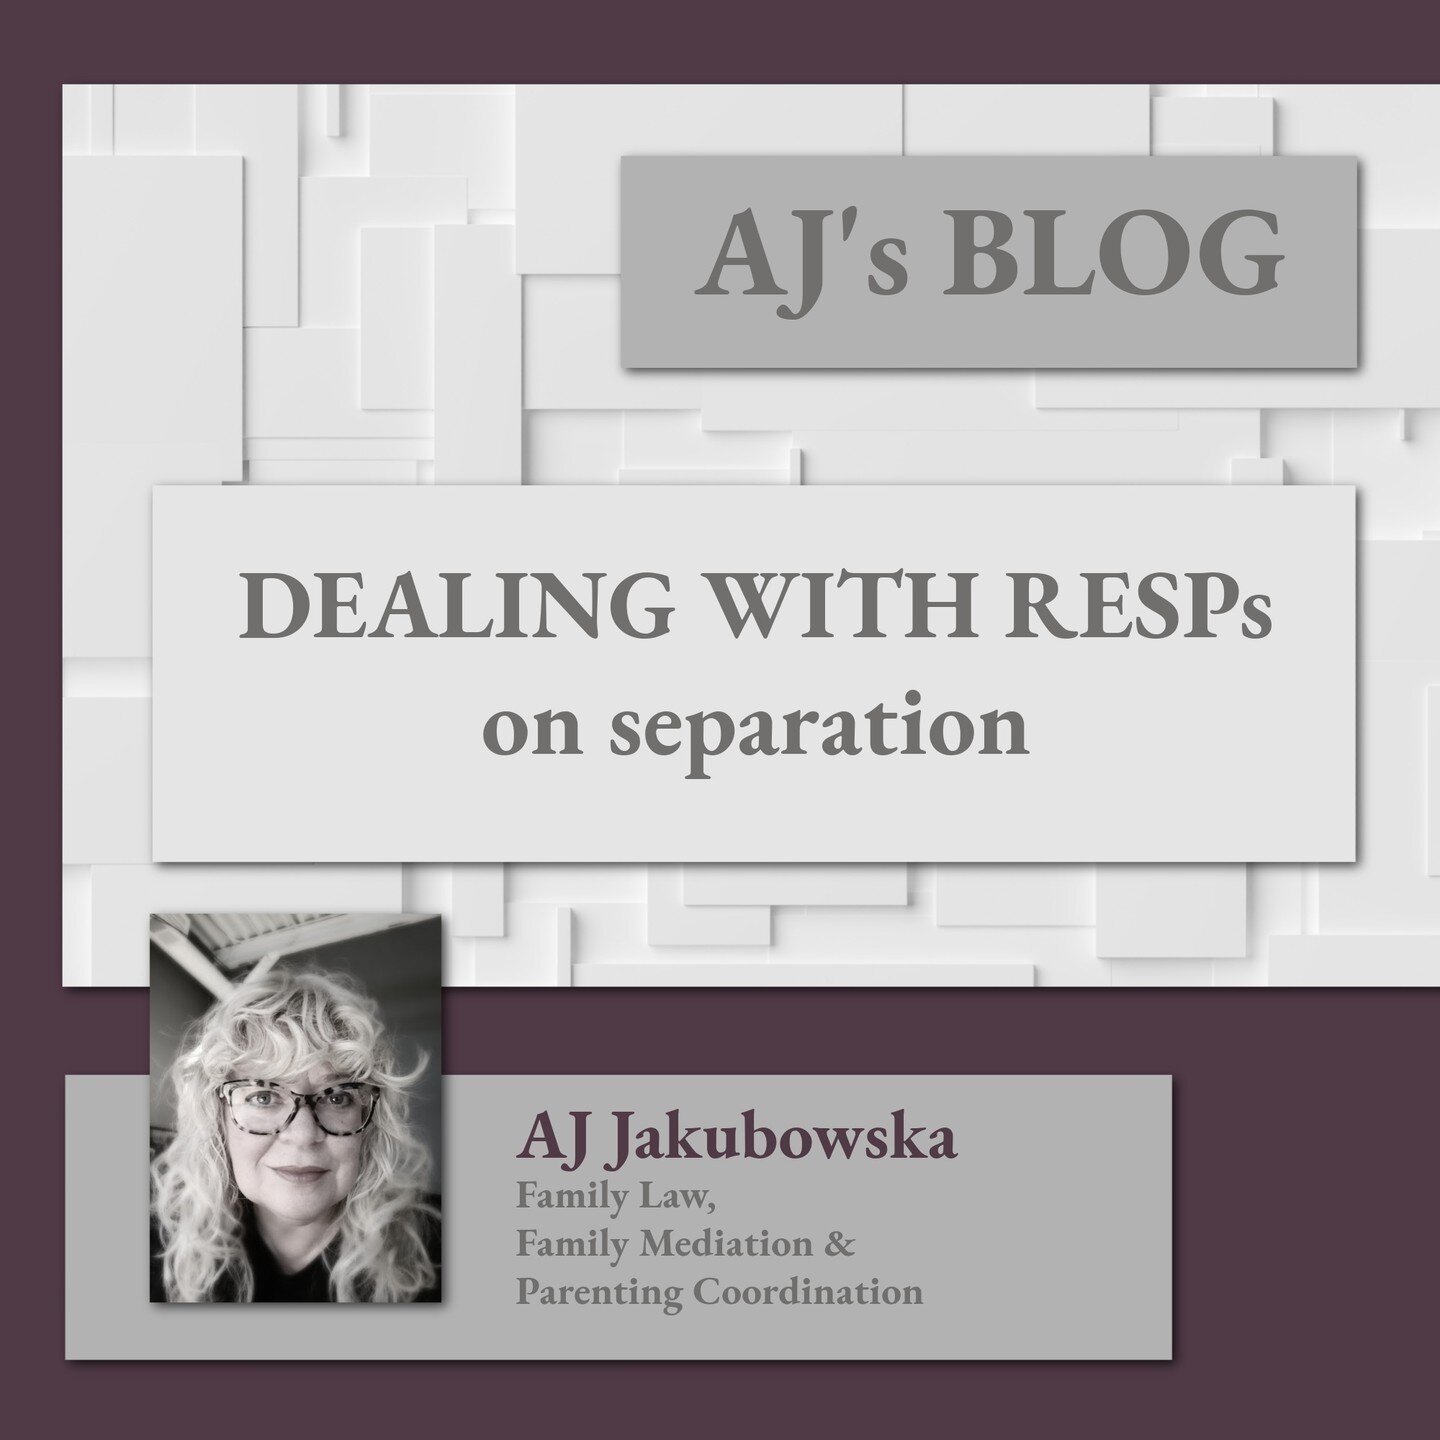 LATEST blog post - on the important topic of dealing with #RESPs on #separation. If you have questions about this issue, have a read! 
Here: ~ https://www.separationinontario.com/family-law-divorce-law-blog/dealing-with-resps-on-separation

#resps #s